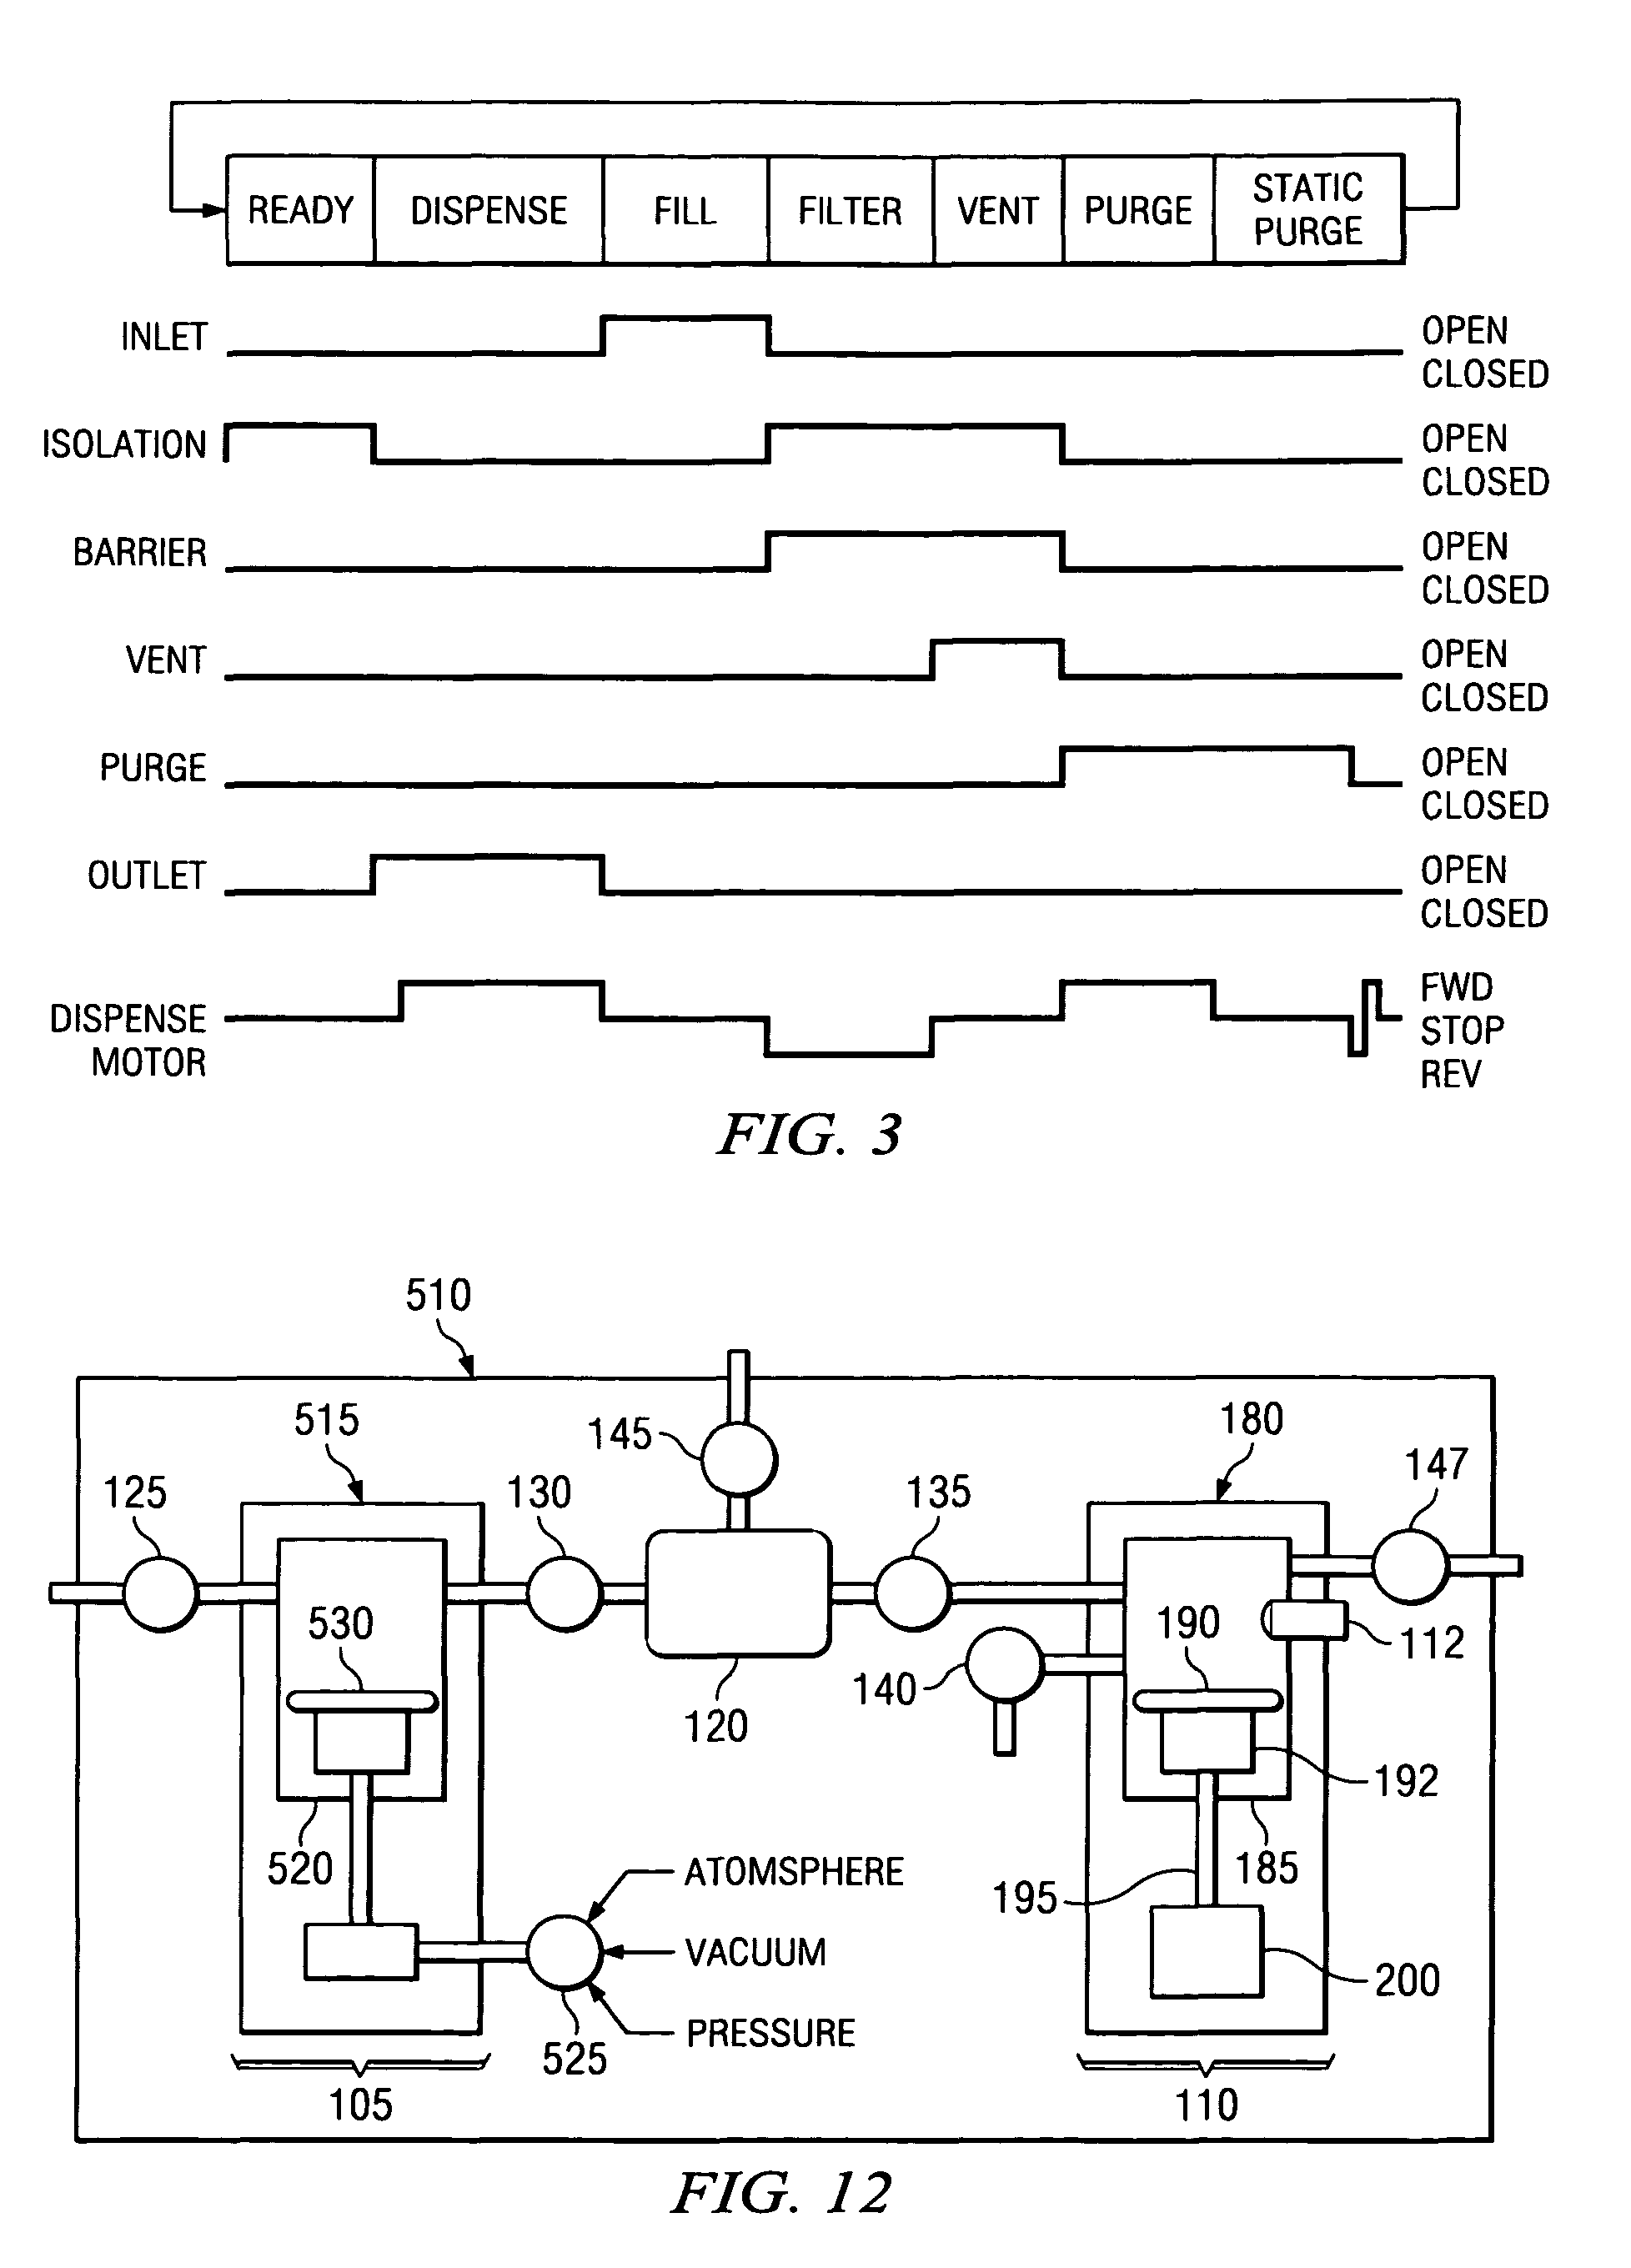 System and method for control of fluid pressure